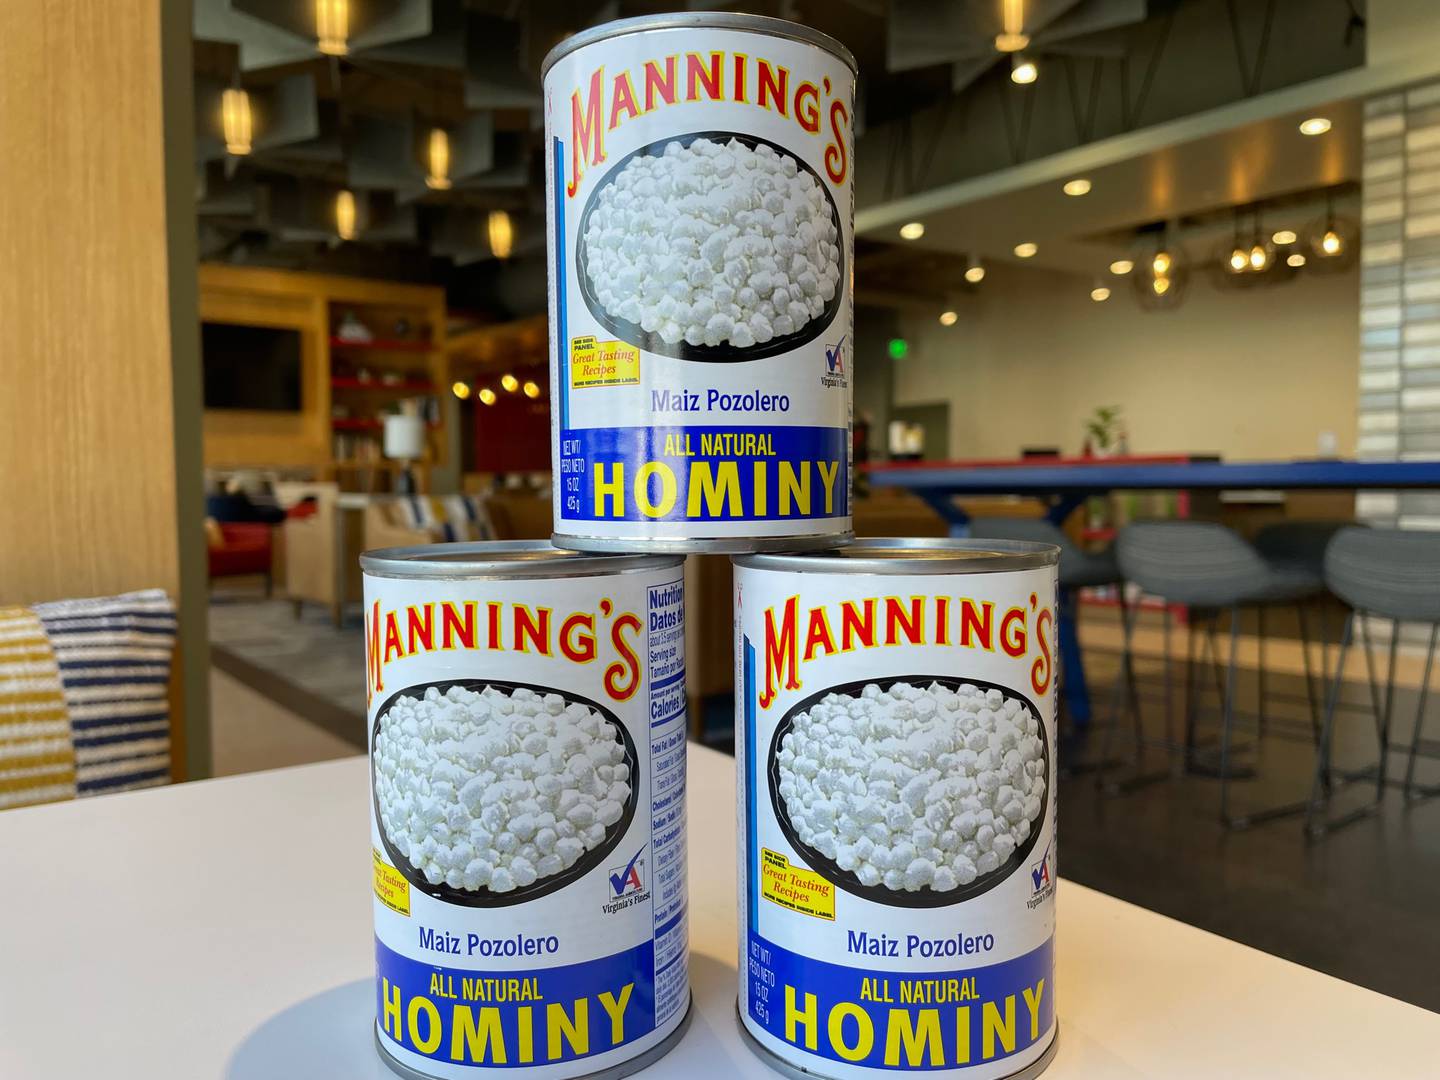 Manning's Hominy was manufactured in Baltimore from 1904 through 1995. Today, it's still a treasured breakfast food for many in the area.